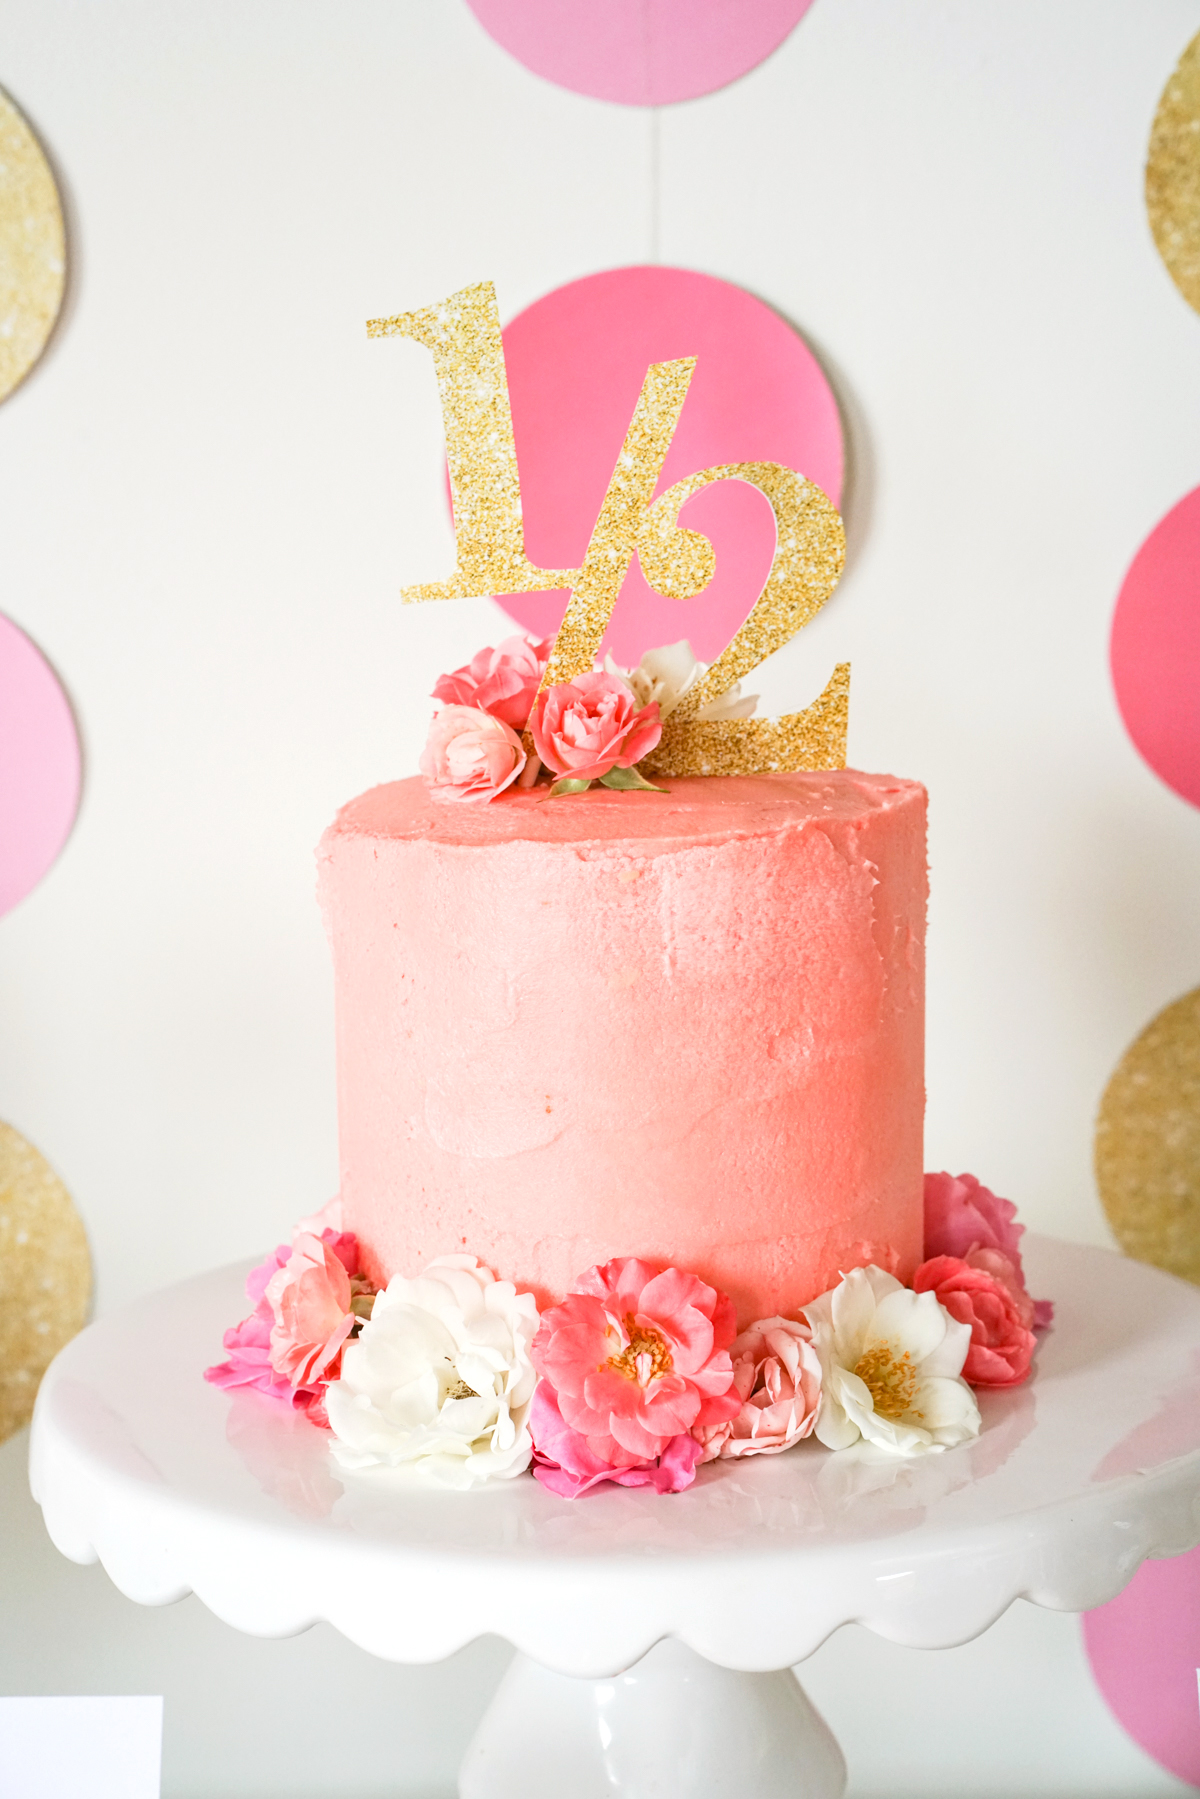 Printable Half Birthday Gold Glitter Cake Topper on top of a pink buttercream cake with pink roses to embellish